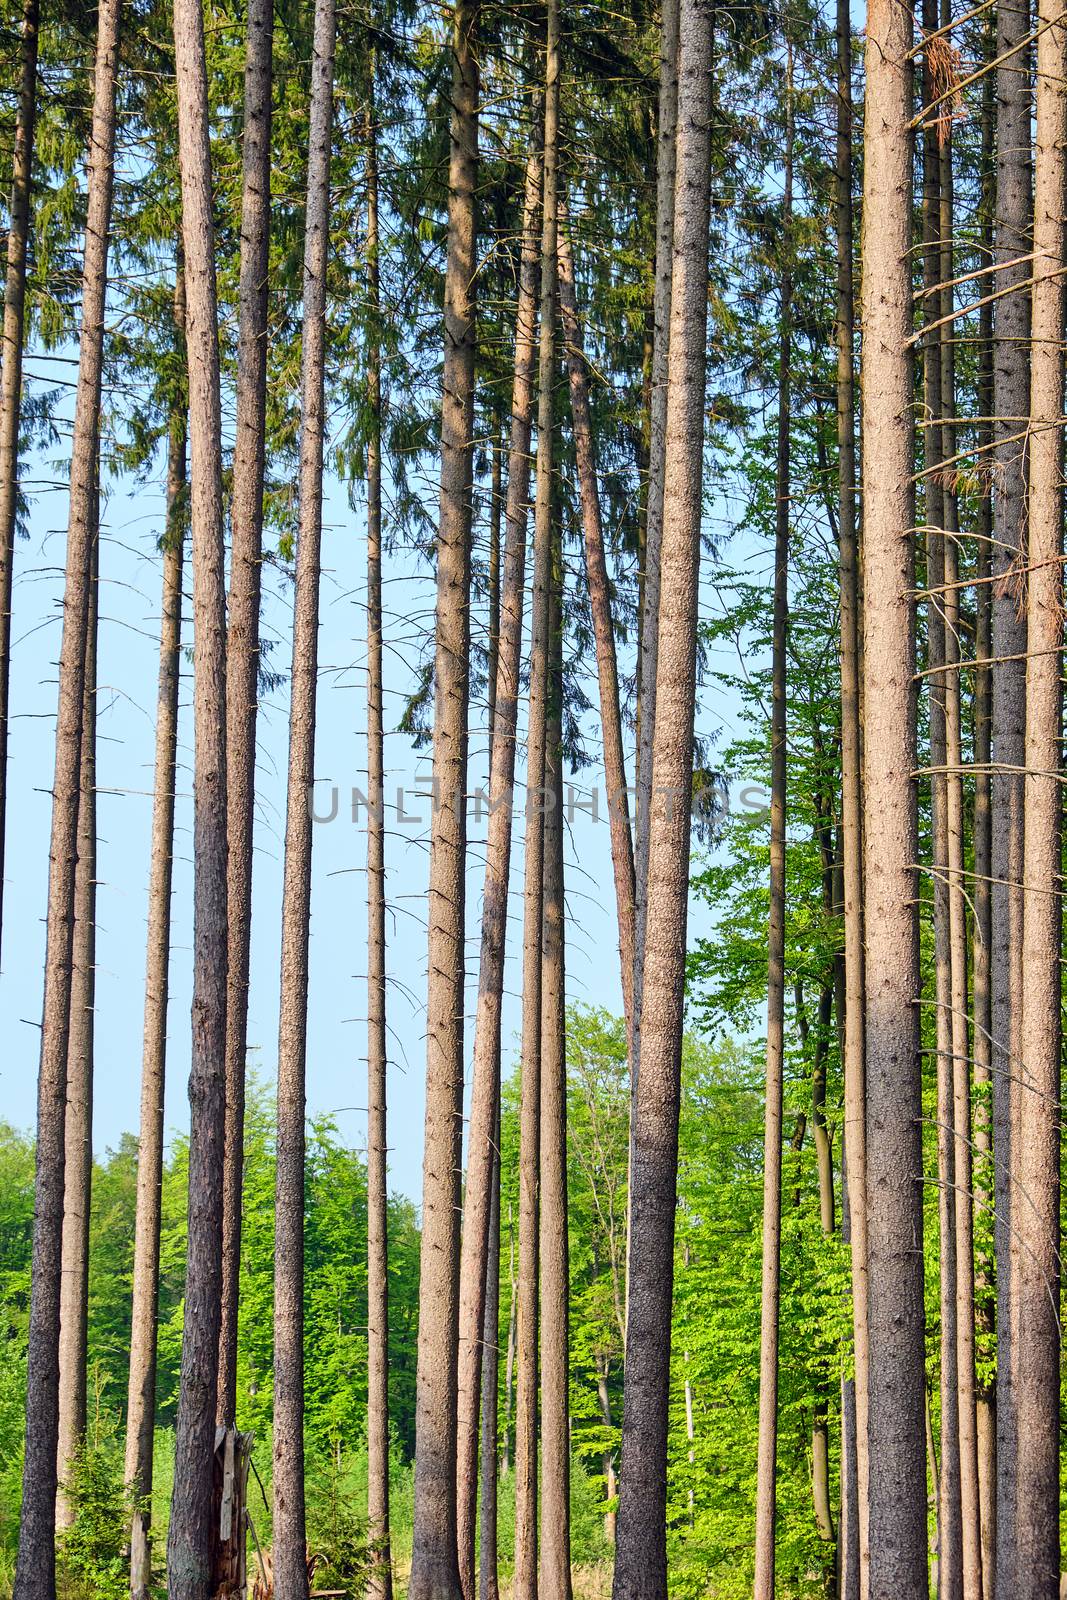 High spruce trees seen in a german forest